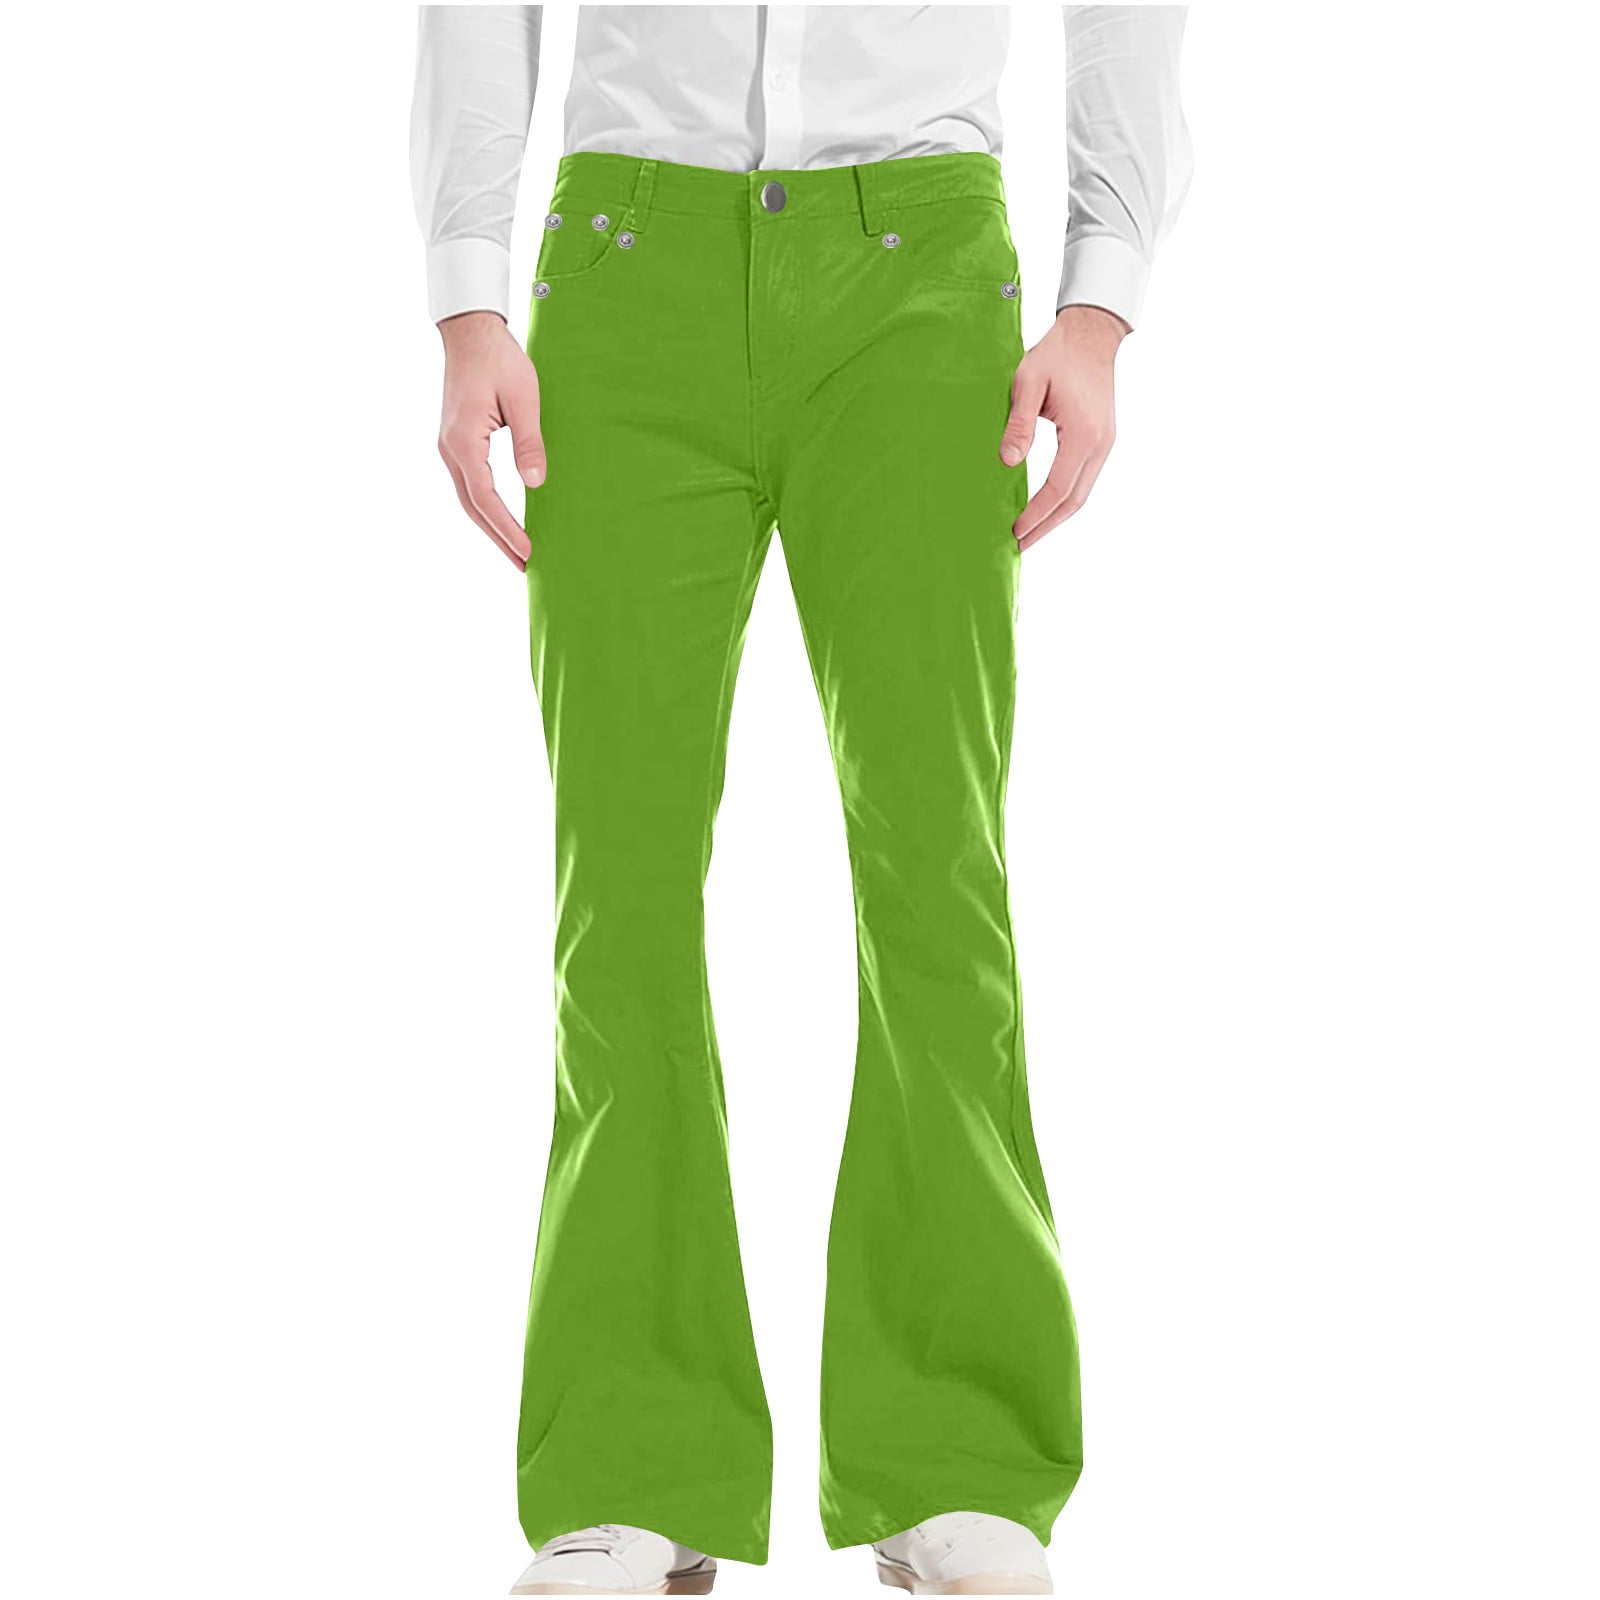 RYRJJ Men's Vintage 60s 70s Bell Bottom Pants Stretch Classic Comfort Chino  Flared Pants Retro Formal Dress Bootcut Trousers(Green,XL) 